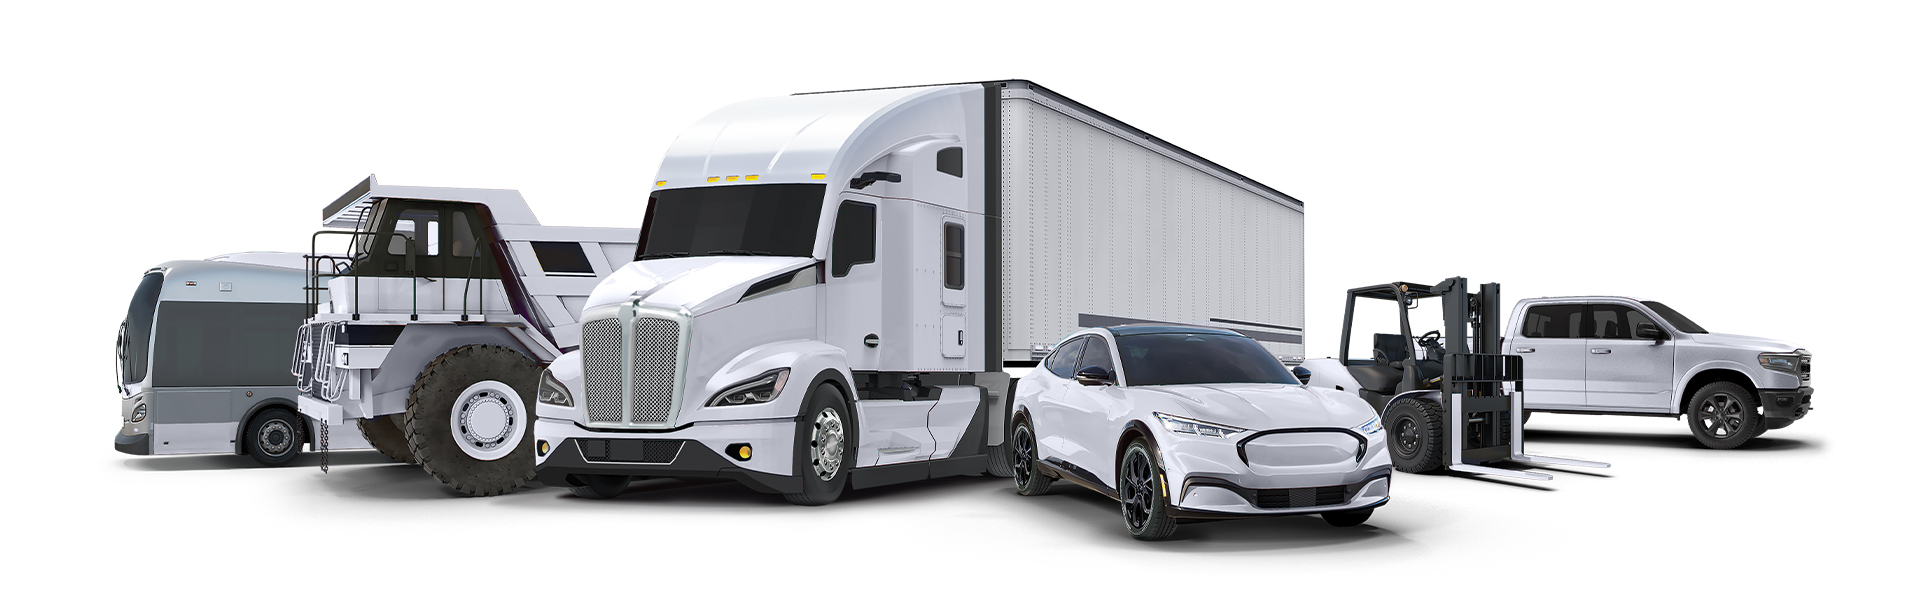 White Vehicle Lineup including bus, dump truck, semi truck, SUV, forklift, and truck